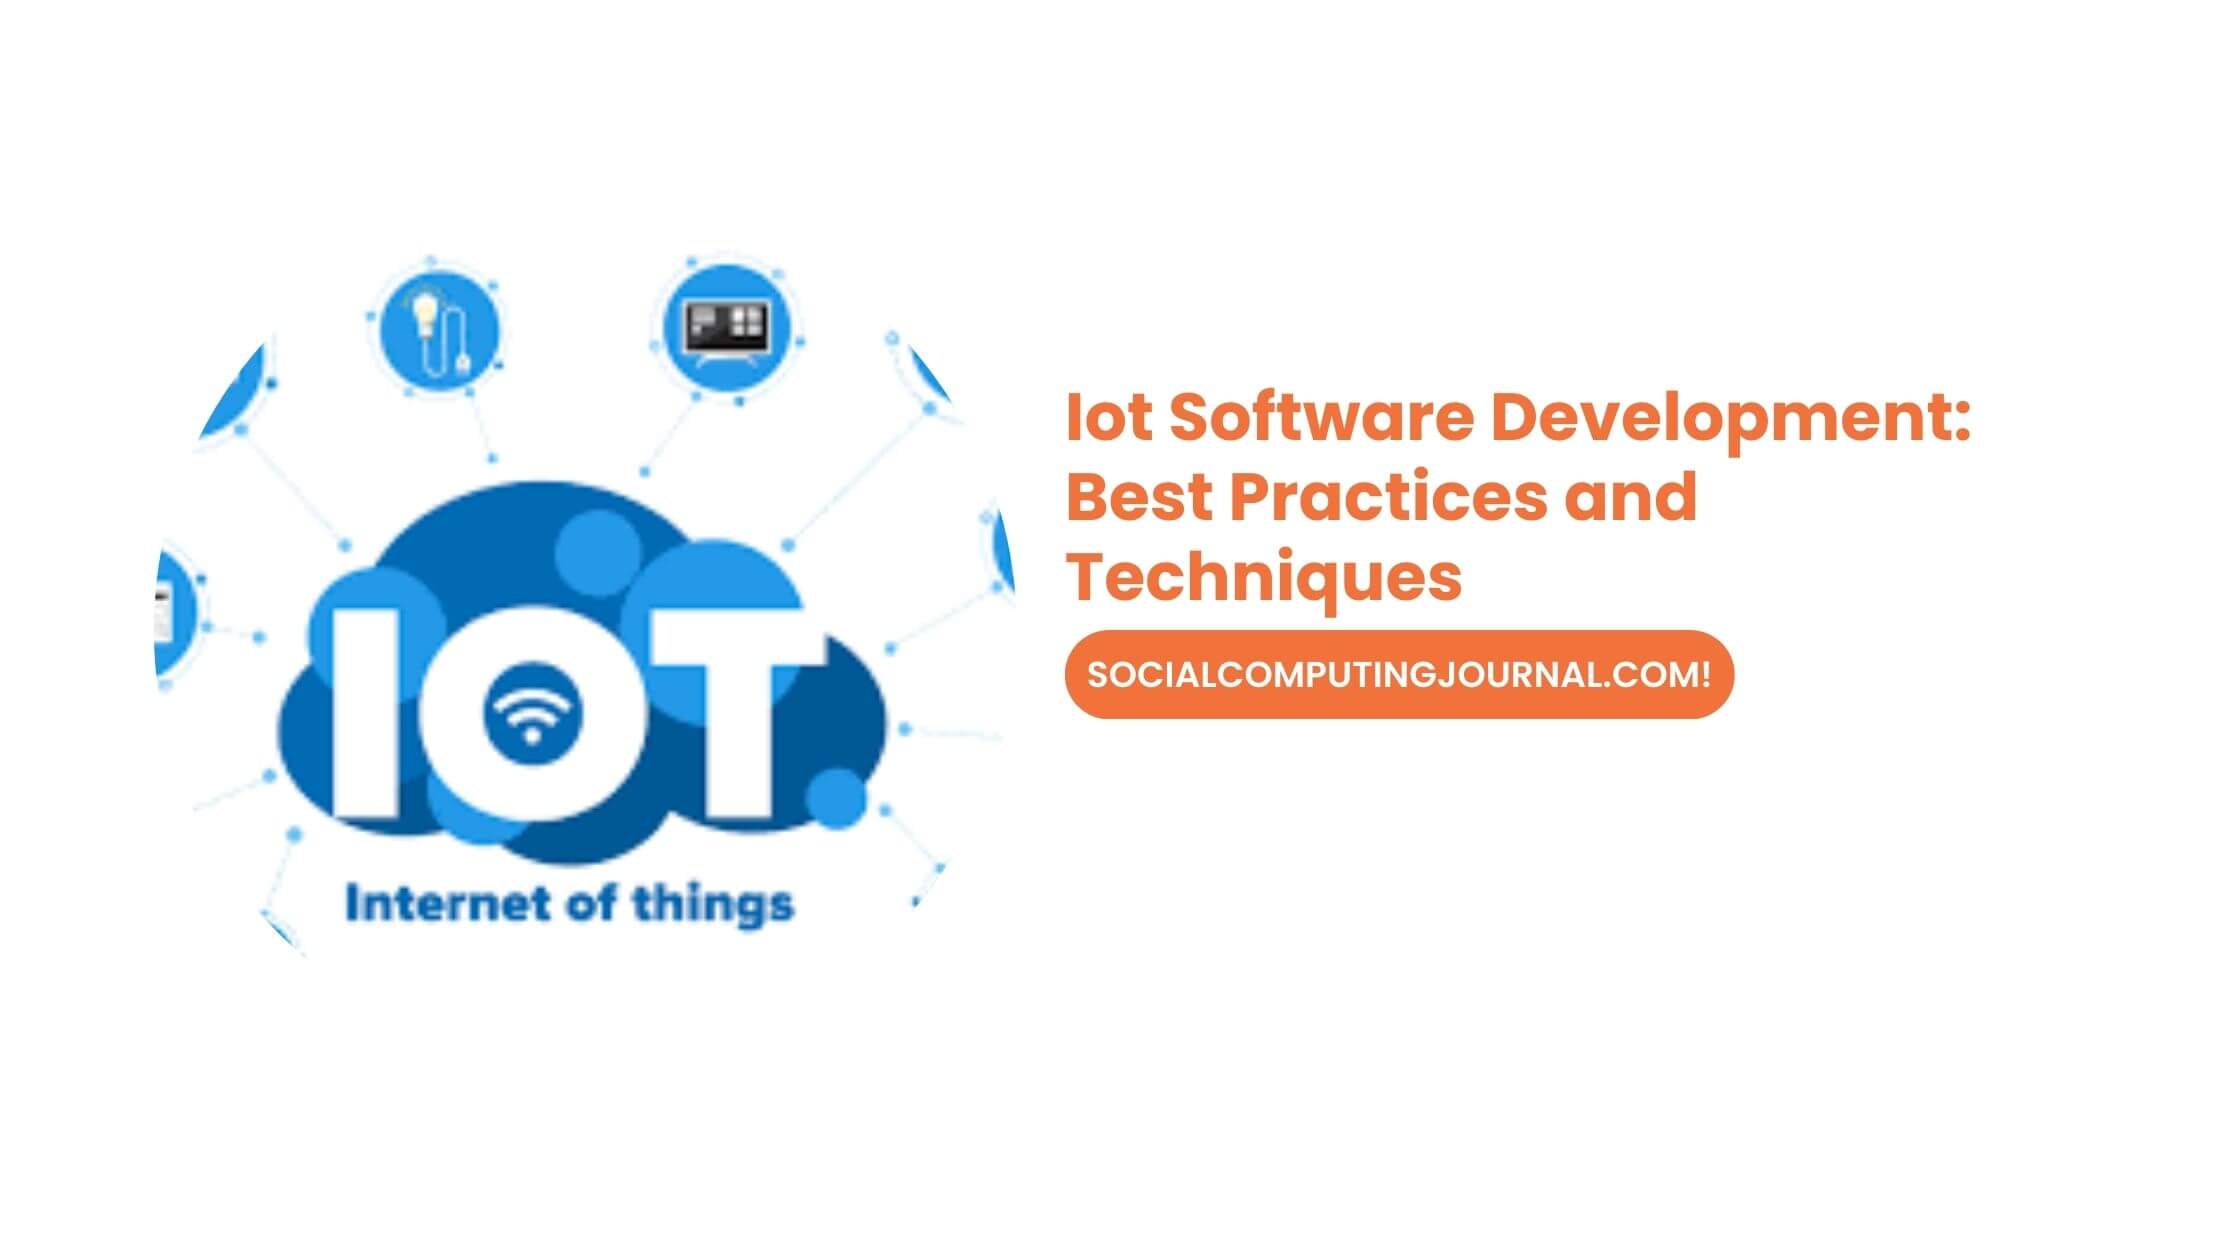 Iot Software Development Best Practices and Techniques